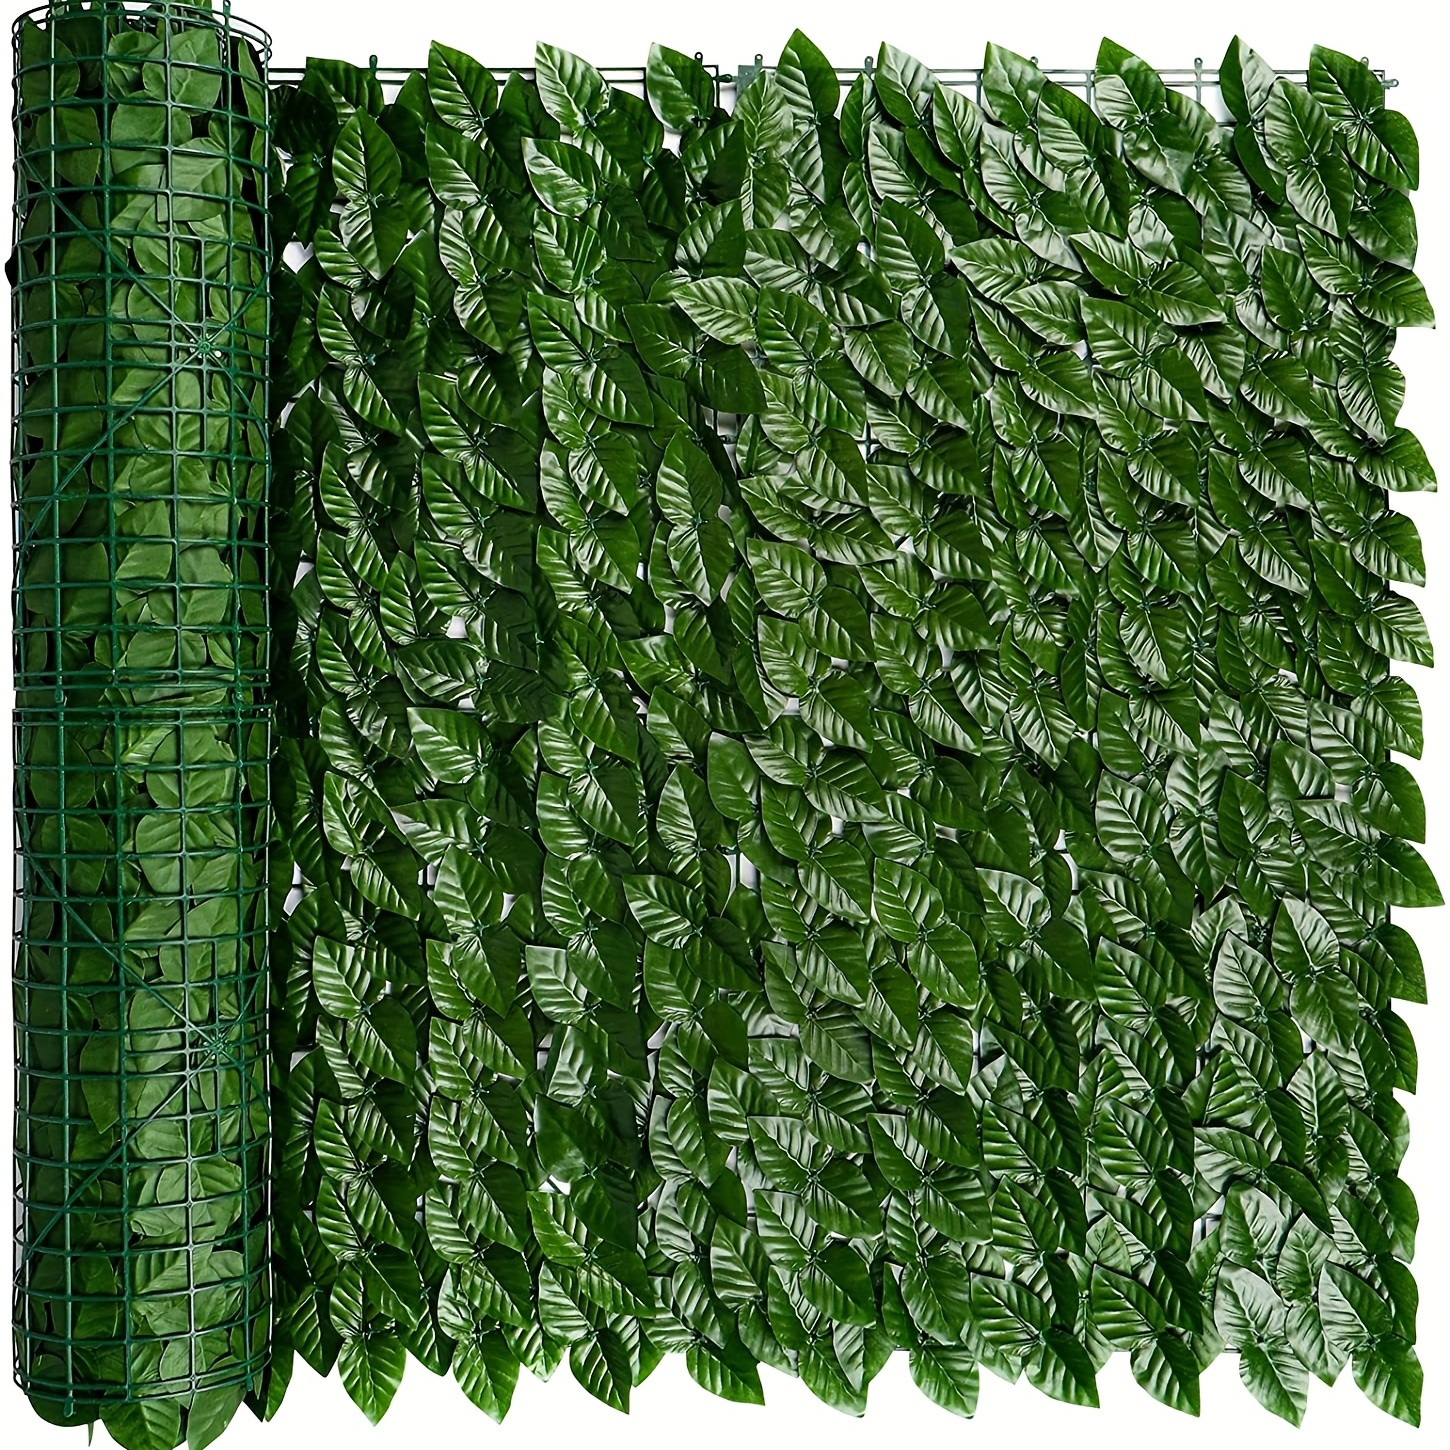 

1pc Artificial Ivy Hedge Faux Leaf Screen, Uv Protected Greenery Wall Decor, Plastic Privacy Fence For Outdoor Garden, Balcony Decoration